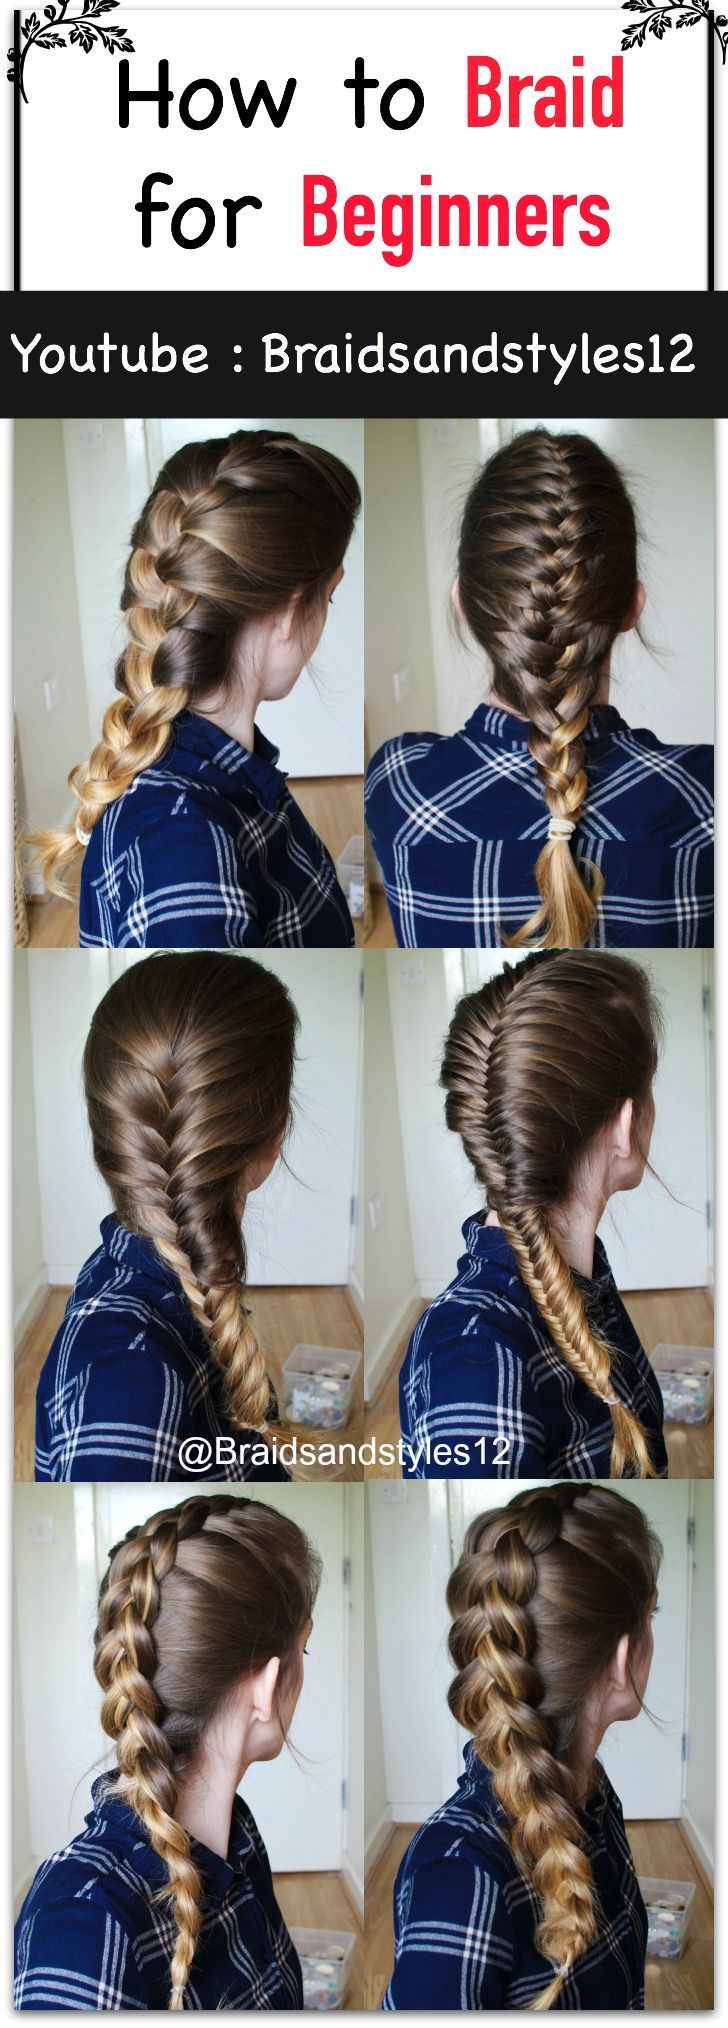 How to Braid your Own Hair for Beginners by Braidsandstyles12. Click the  below ...